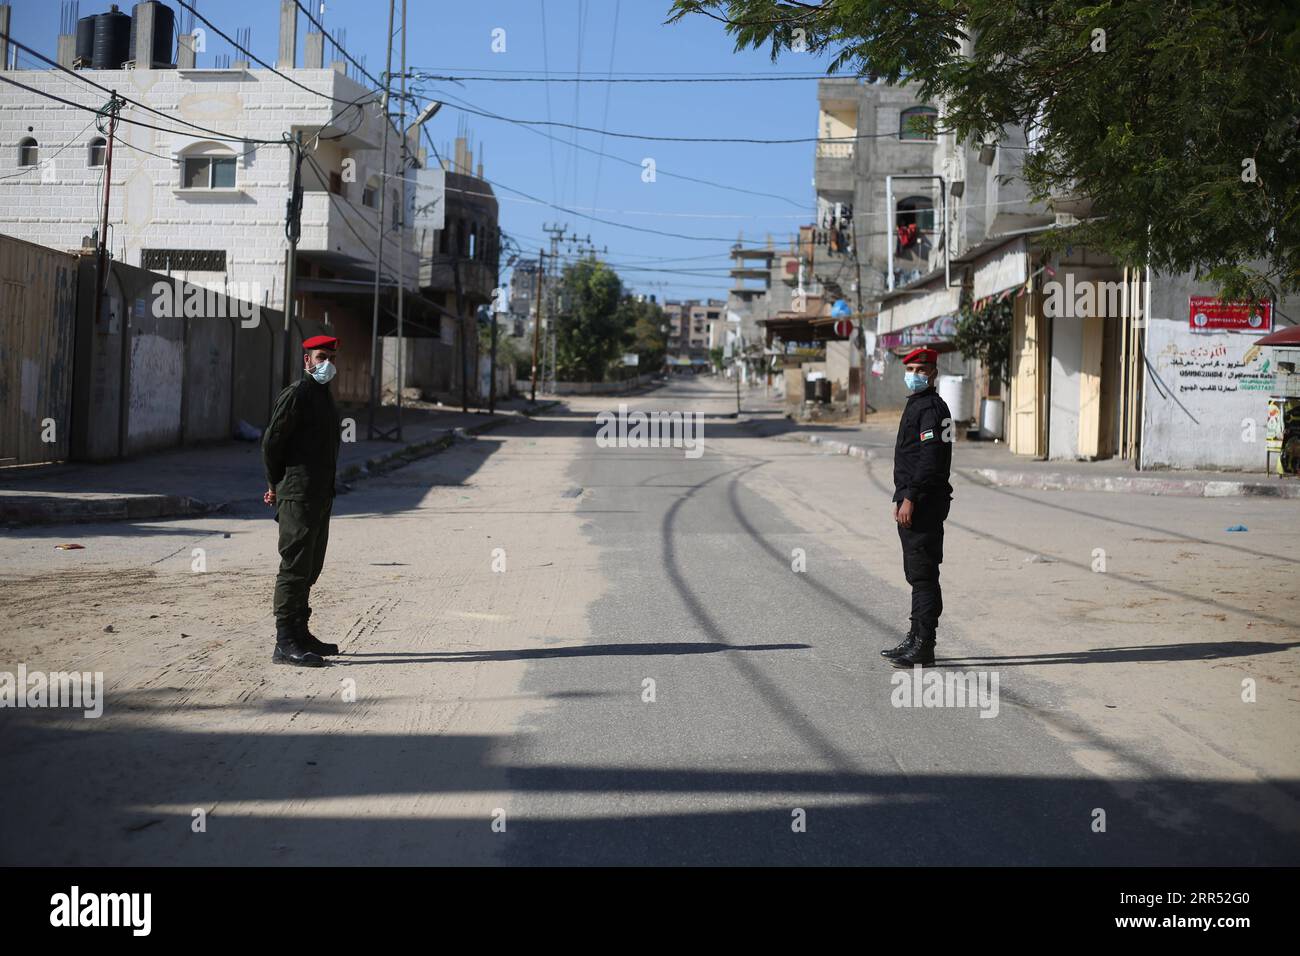 201219 -- GAZA, Dec. 19, 2020 -- Palestinian policemen stand guard in the Gaza Strip city of Rafah amid a lockdown, on Dec. 19, 2020. A full lockdown and curfew have been imposed in the West Bank and the Gaza Strip to curb the growing numbers of COVID-19 infections and deaths. Photo by /Xinhua MIDEAST-GAZA-RAFAH-COVID-19-LOCKDOWN KhaledxOmar PUBLICATIONxNOTxINxCHN Stock Photo